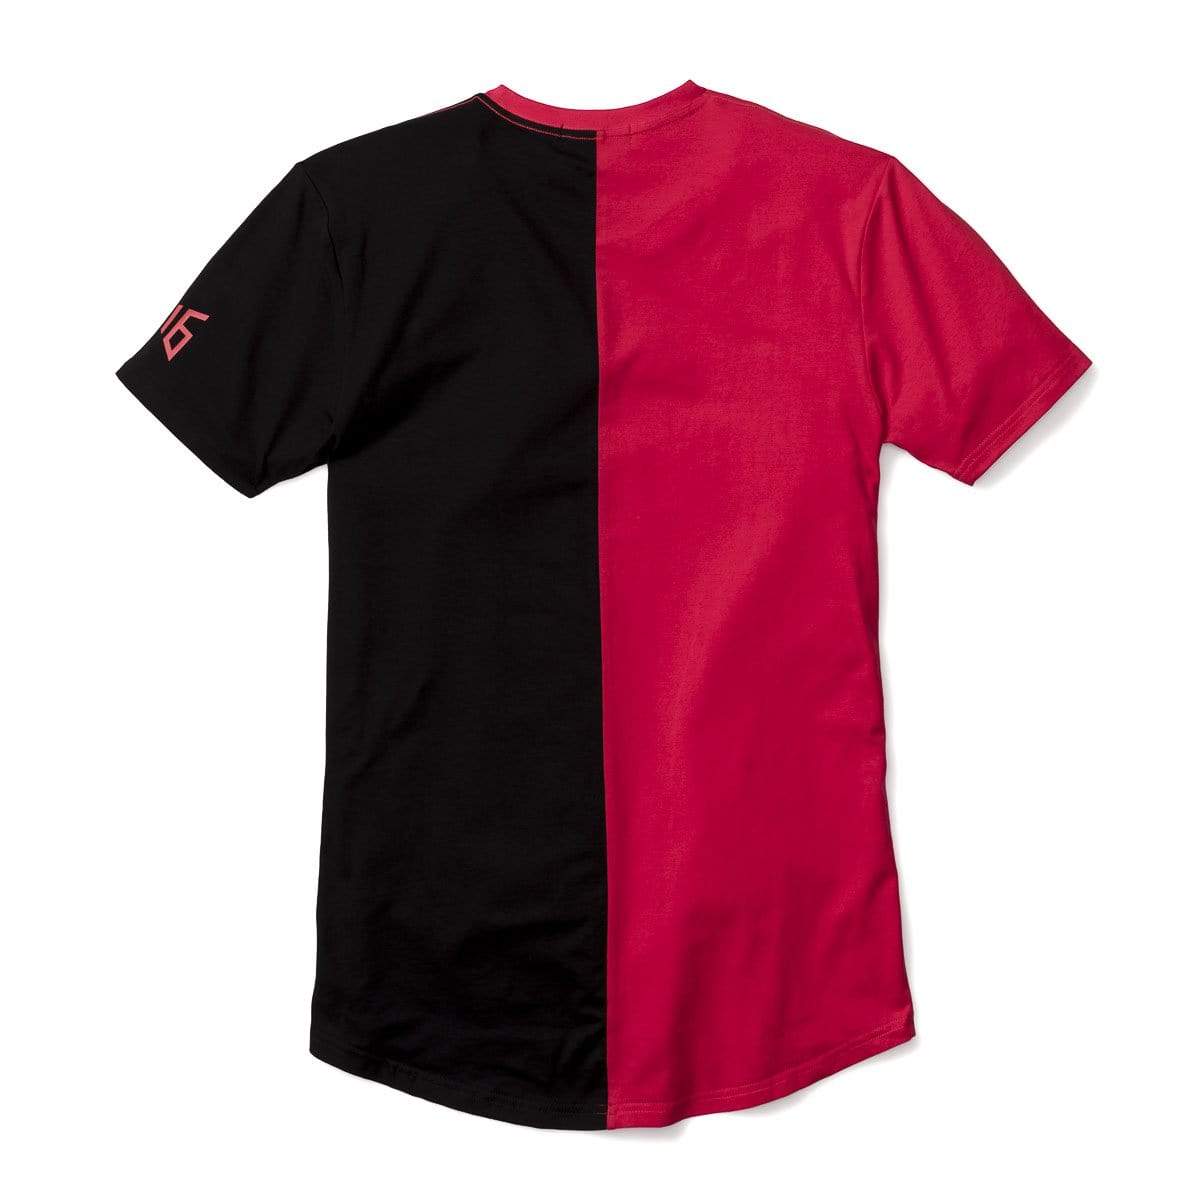 3:16 Collection Apparel Salvation Vertical Block Swoop Tee - Black and Red